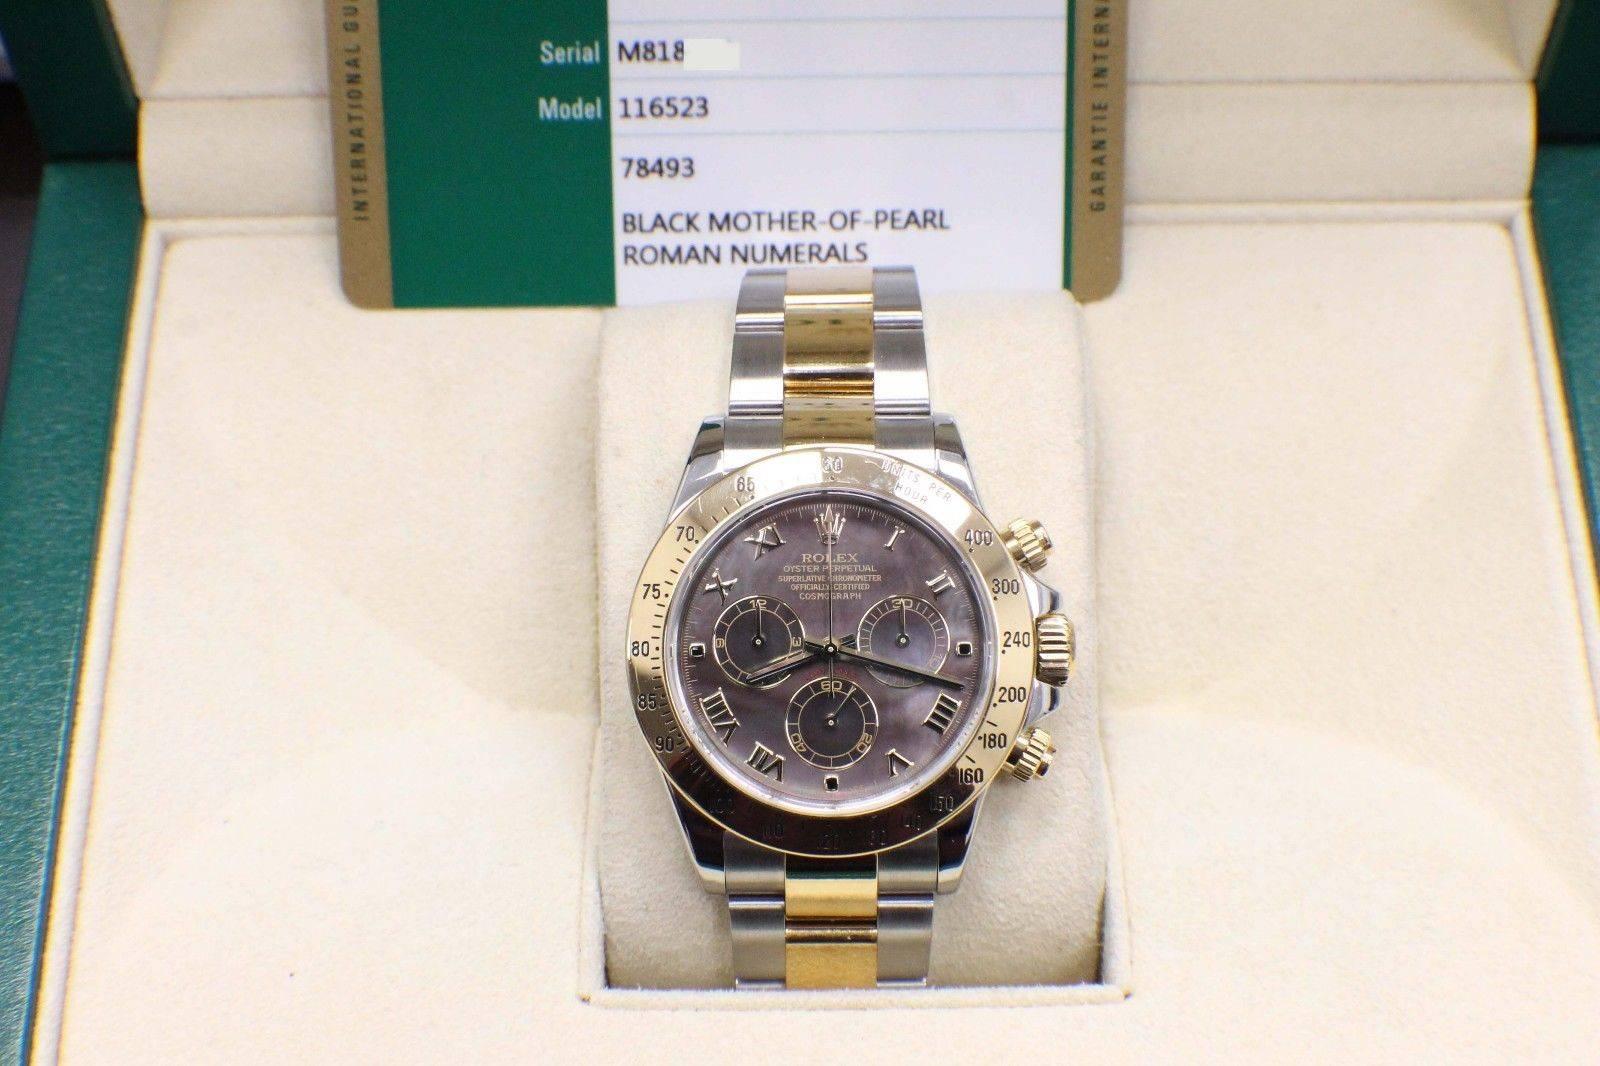 2016 Rolex Daytona 116523 18 Karat Gold and Stainless Black Mother-of-Pearl Dial 1